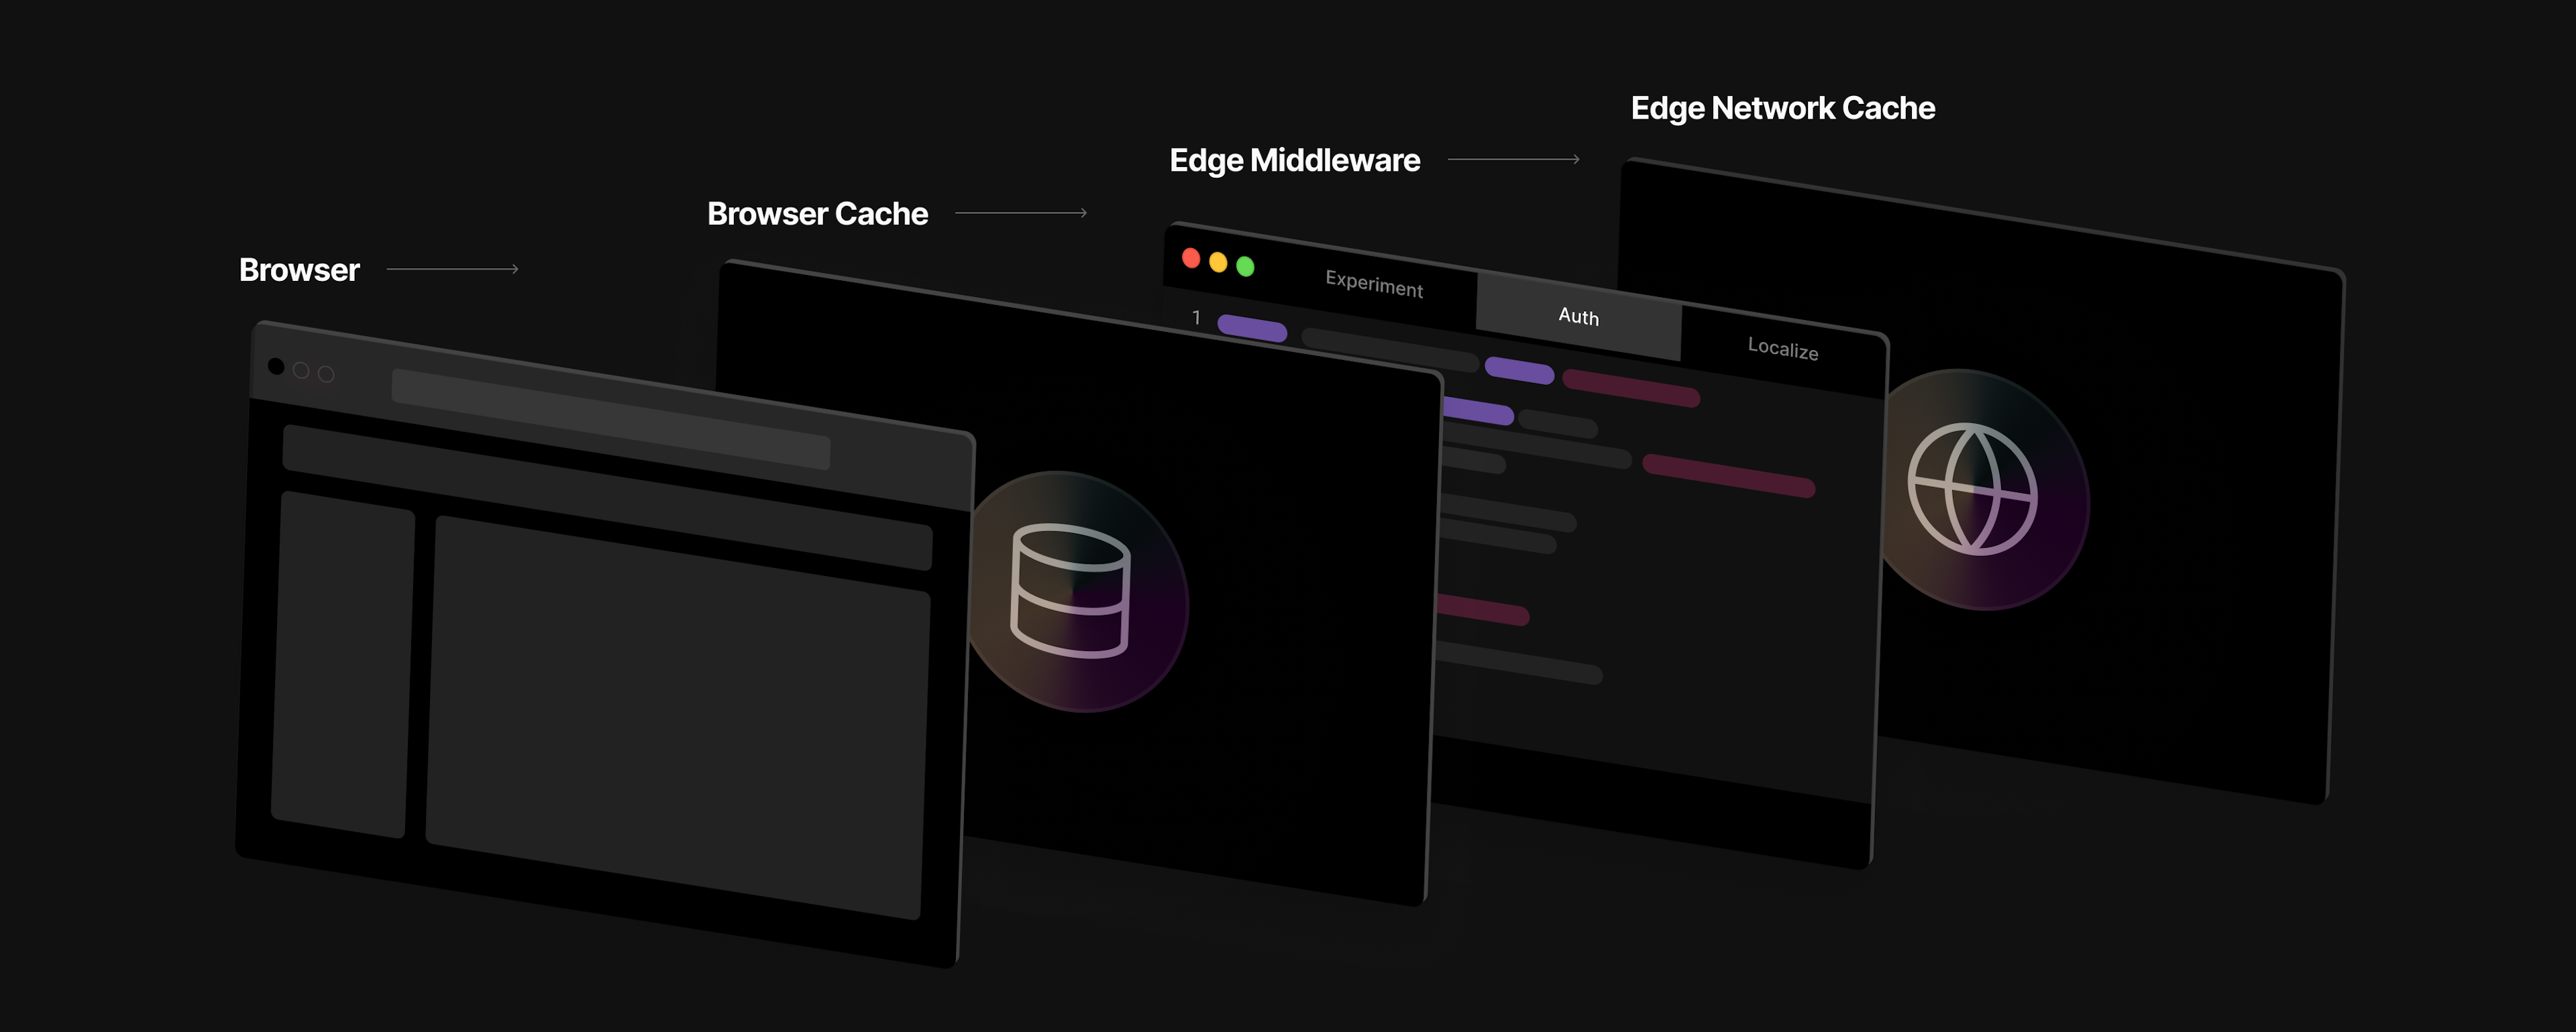 Edge Middleware runs before the Edge Network Cache, for fast rewrites and redirects